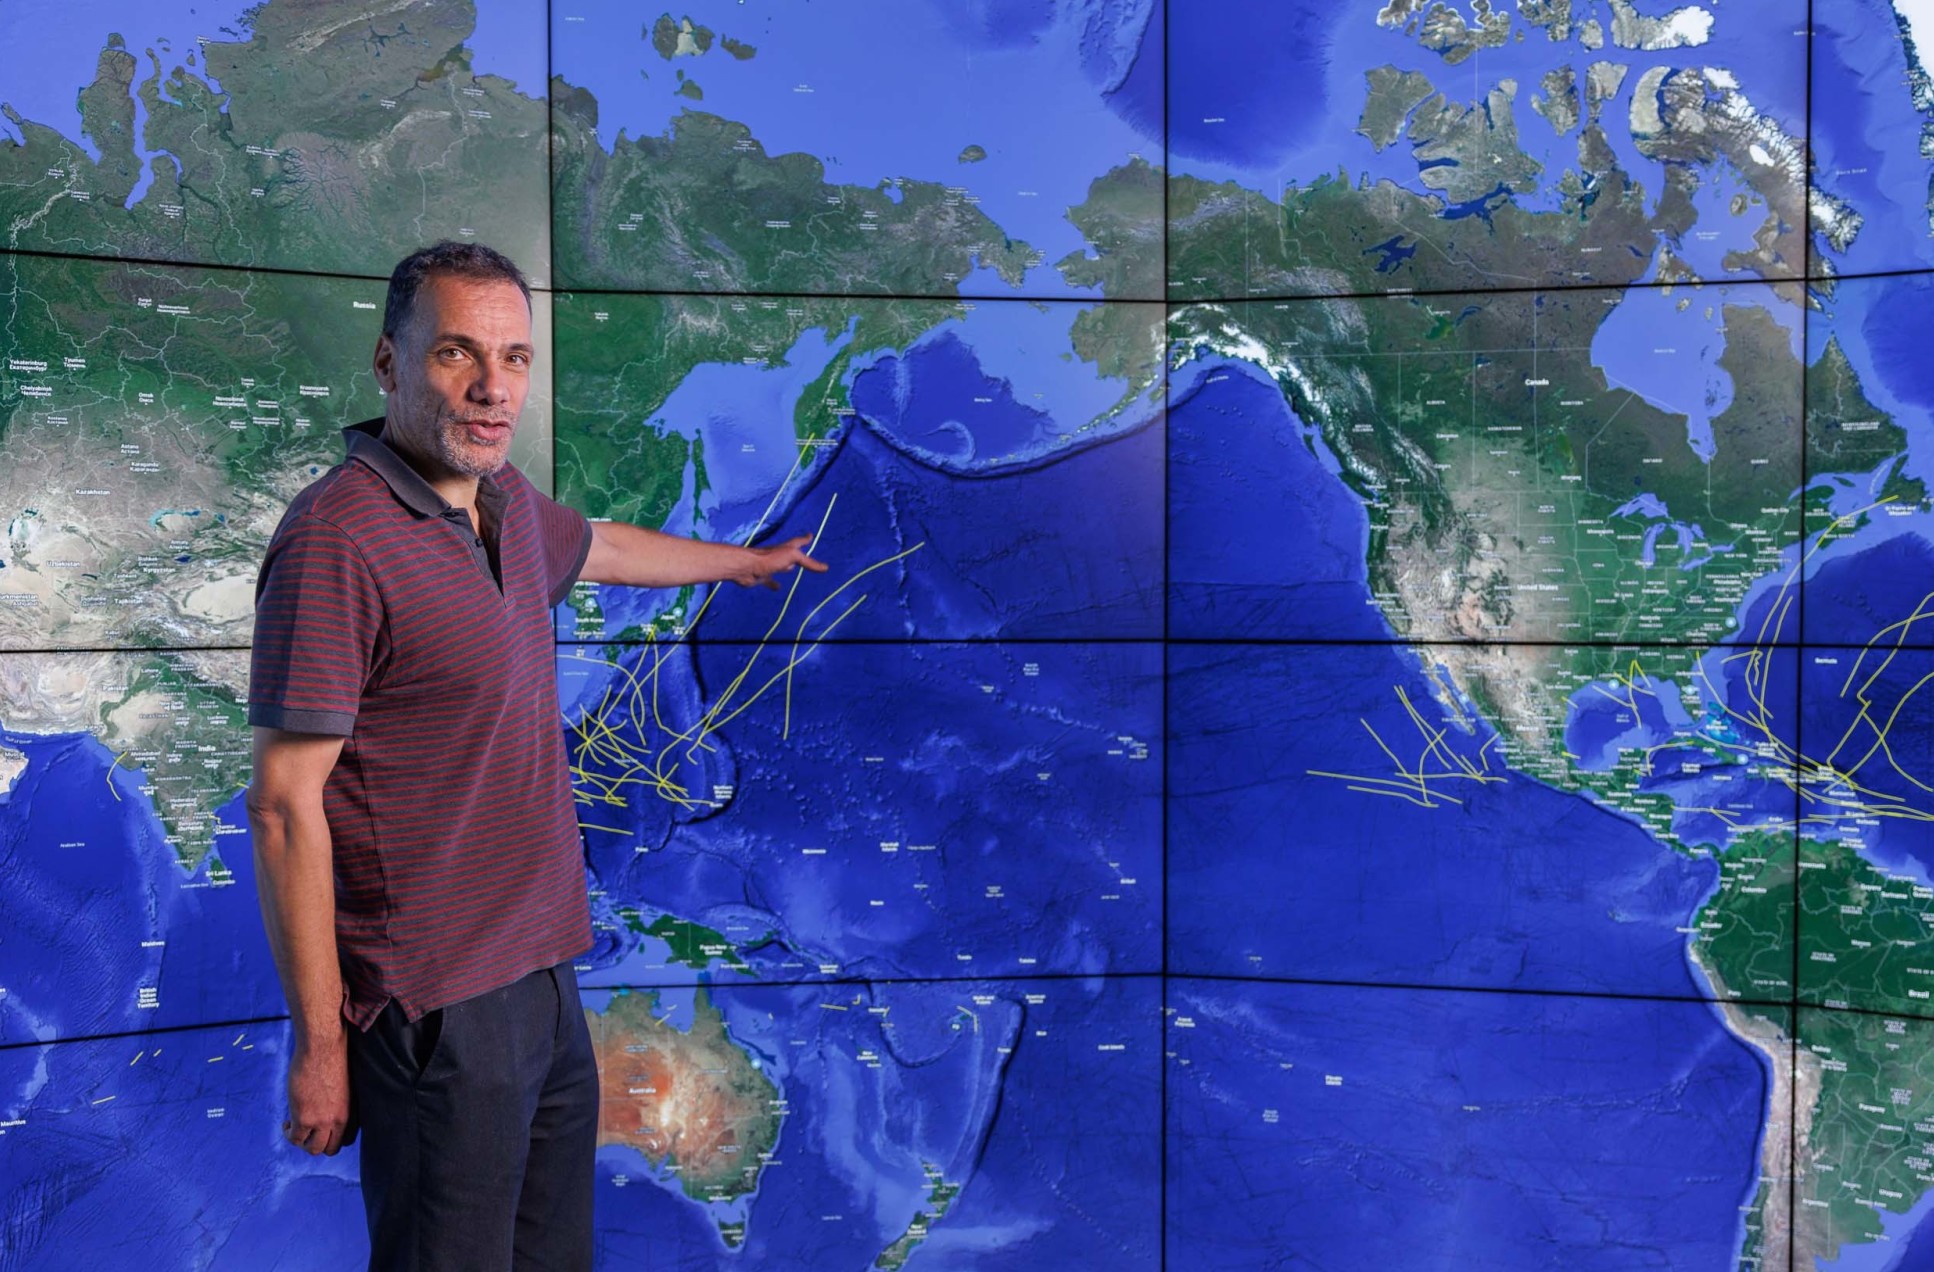 A man pointing to a large screen displaying a map of the world with hurricane tracks drawn on it